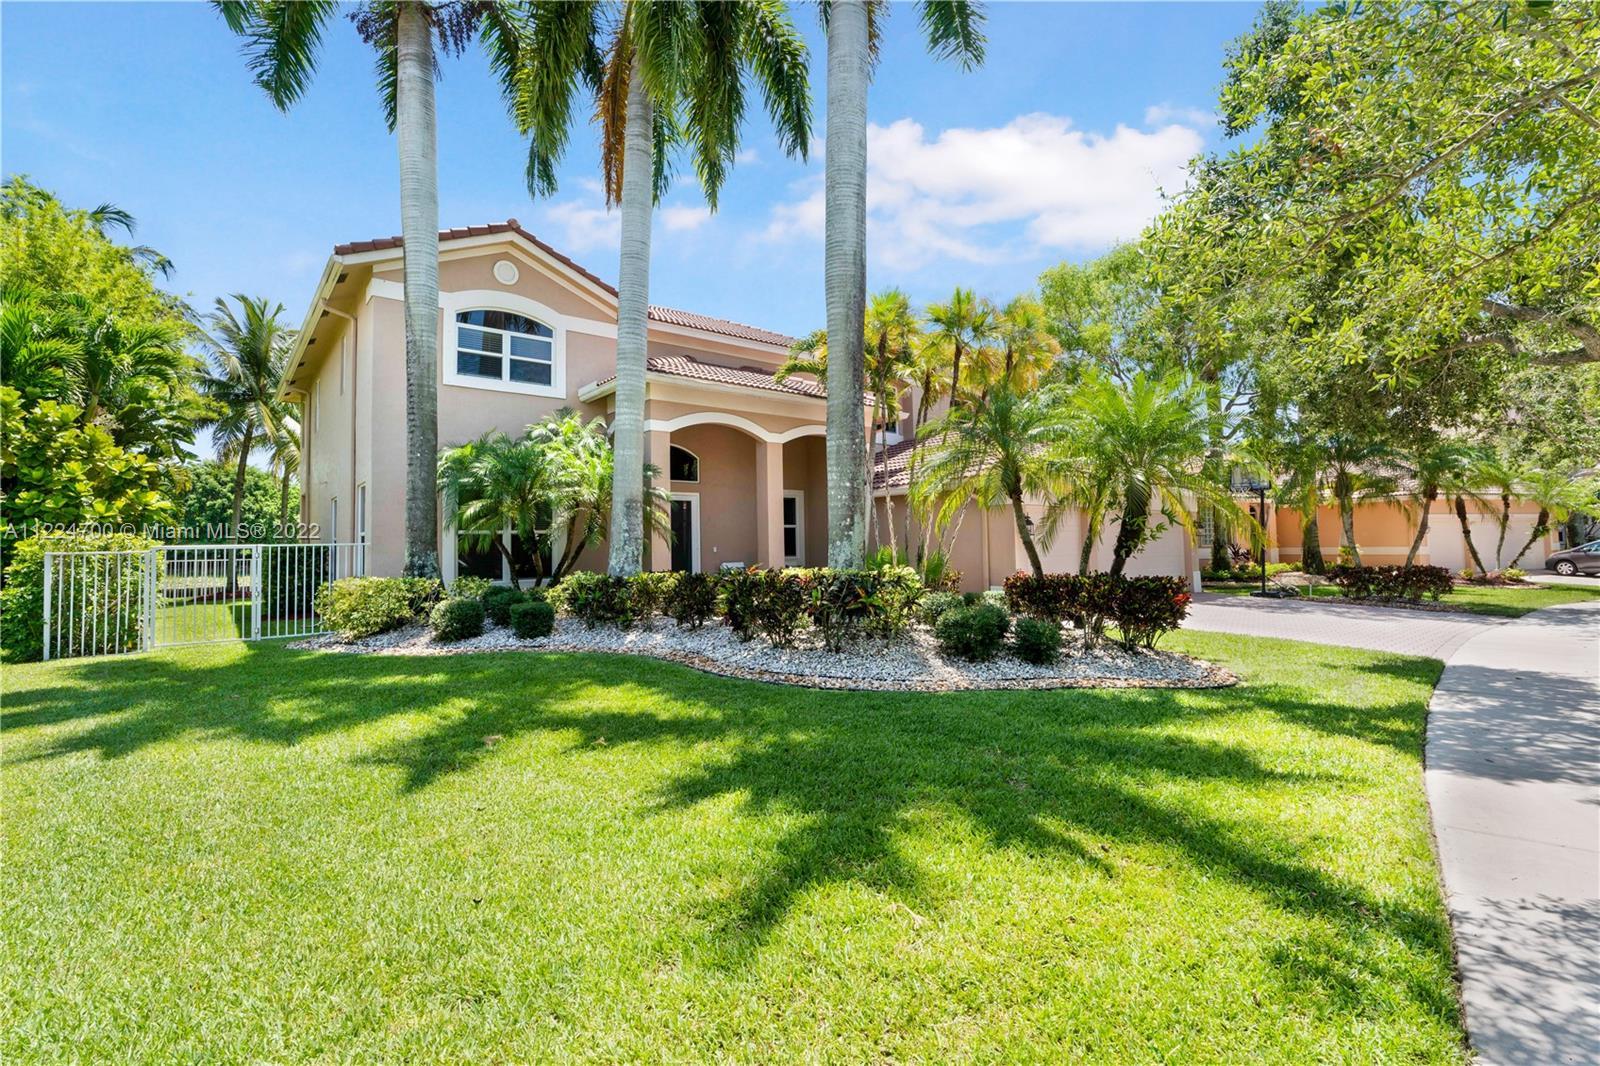 A charming 6B/5BA waterfront home located in the prestigious resort style gated commnunity of Savann